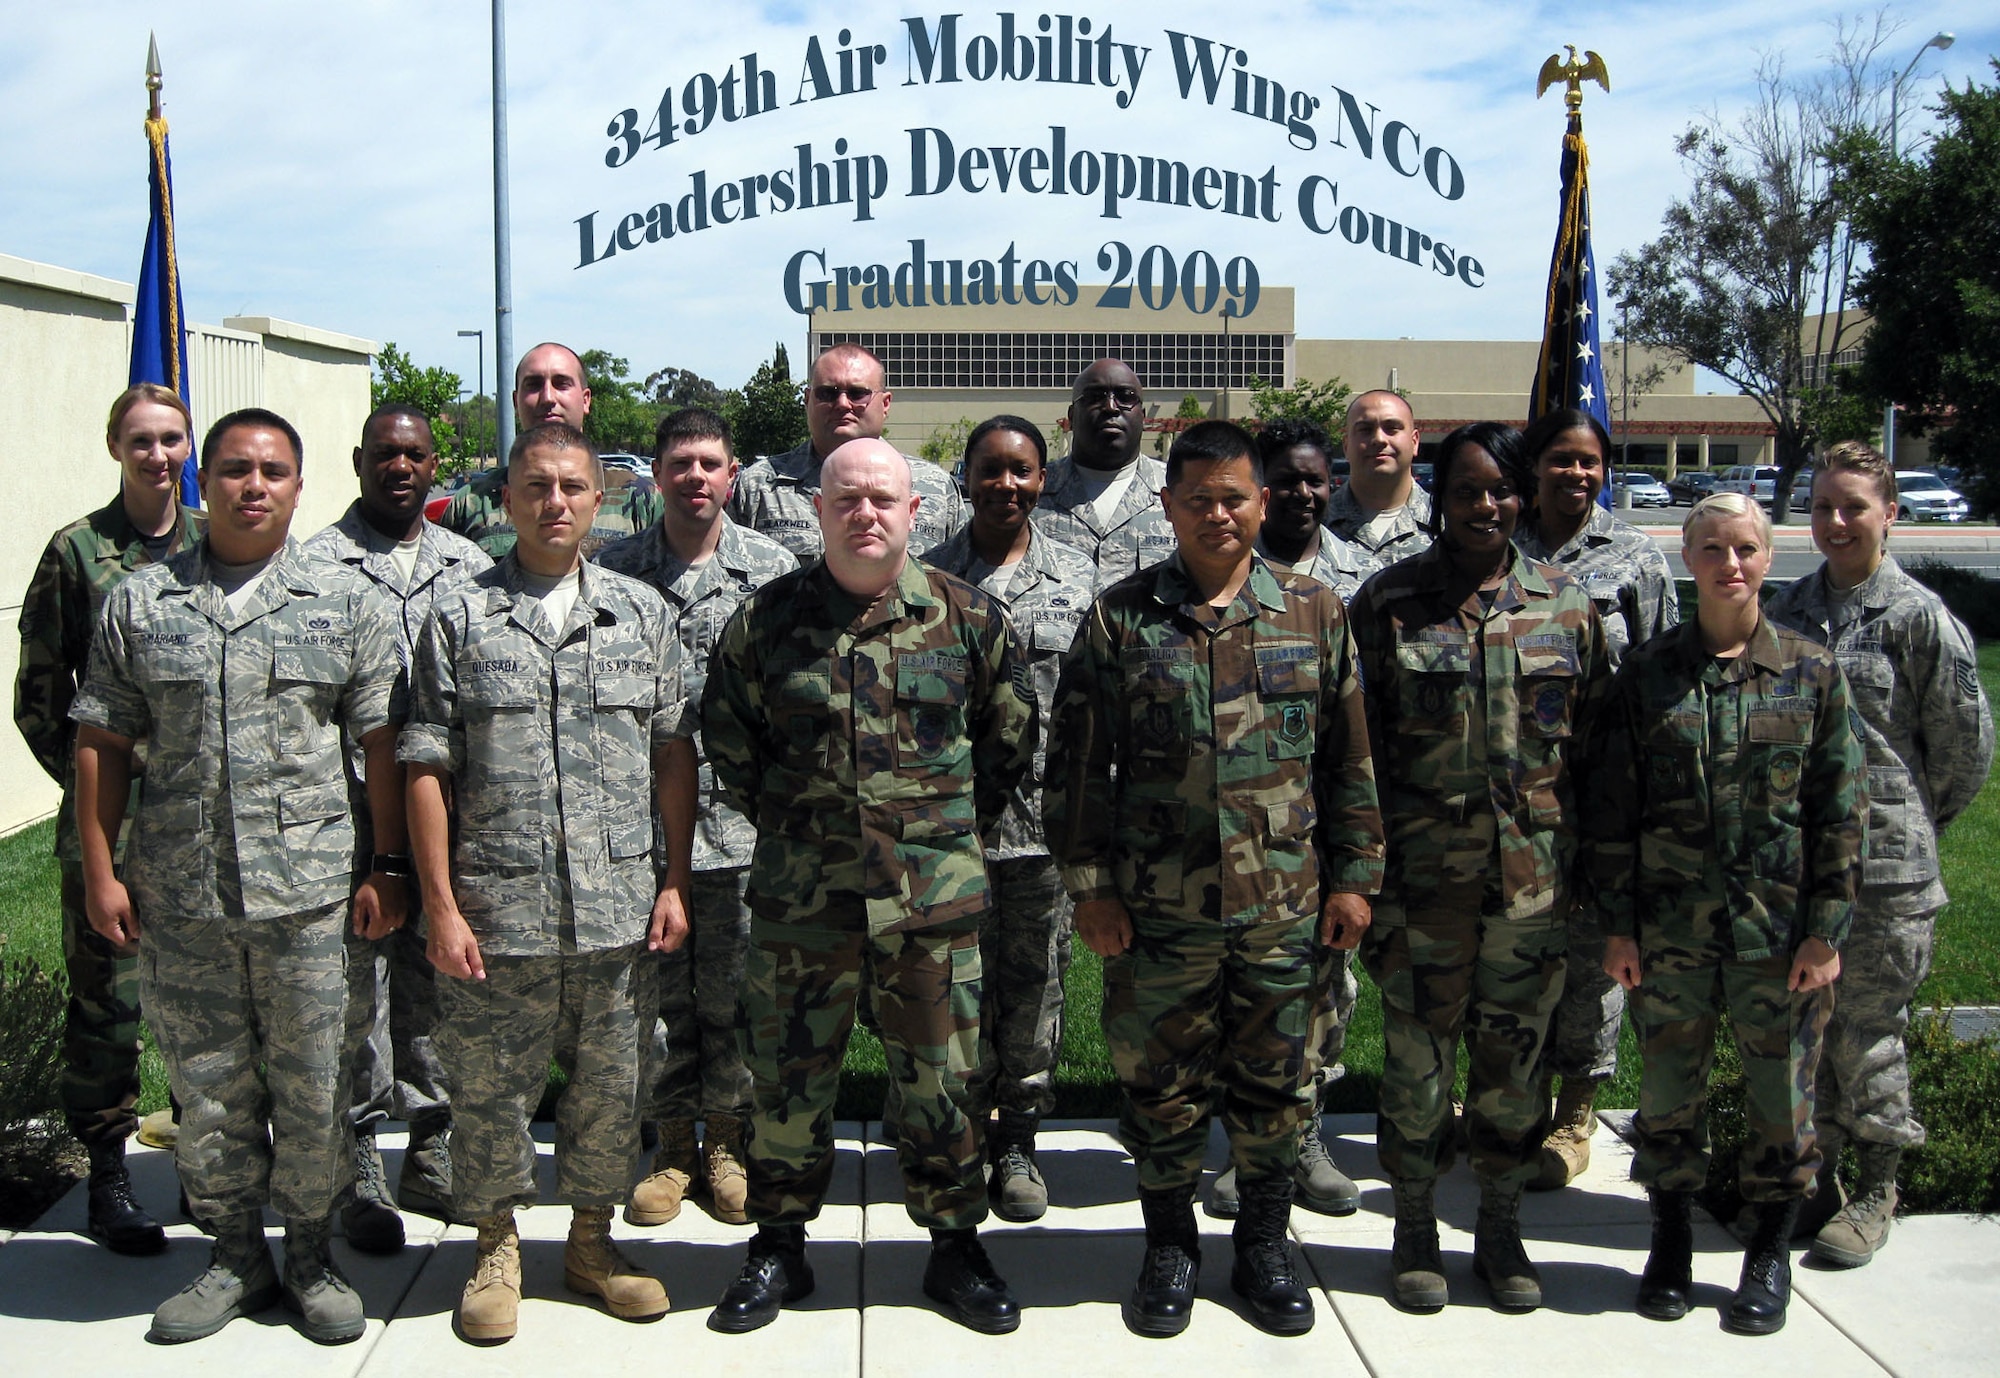 TRAVIS AIR FORCE BASE, Calif. -- Fourteen enlisted members of the 349th Air Mobililty Wing recently graduated from the Noncommissioned Office Leadership Development Course. The two-week course, offered locally to military members, assists in their career growth and development of leadership skills. For more information about the NCOLDC contact the 349th Mission Support Squadron at 707-424-1615.  Pictured back to front, left to right: Staff Sgt. Ian Hellstrom, Tech. Sgt. Will Balckwell, Tech. Sgt. David Smith, Tech. Sgt. Alfred Hall; (middle row) Tech. Sgt. Stephanie Delmore, Master Sgt. Carl VanDiver (facilitator) Staff Sgt. Mickey Gibbs, Staff Sgt. Ann Marie Lakes, Tech. Sgt. Kyla Bowie, Tech. Sgt. Andrea Johnson (facilitator); (front row) Staff Sgt. Johathan Mariano, Tech. Sgt. Michael Quesada, Tech. Sgt. Douglass Austin, Tech. Sgt. Bernardo Tinaliga, Staff Sgt. Sherlyn Wilson and Staff Sgt. Bethany Hansis.  (U.S. Air Force courtesy photo)